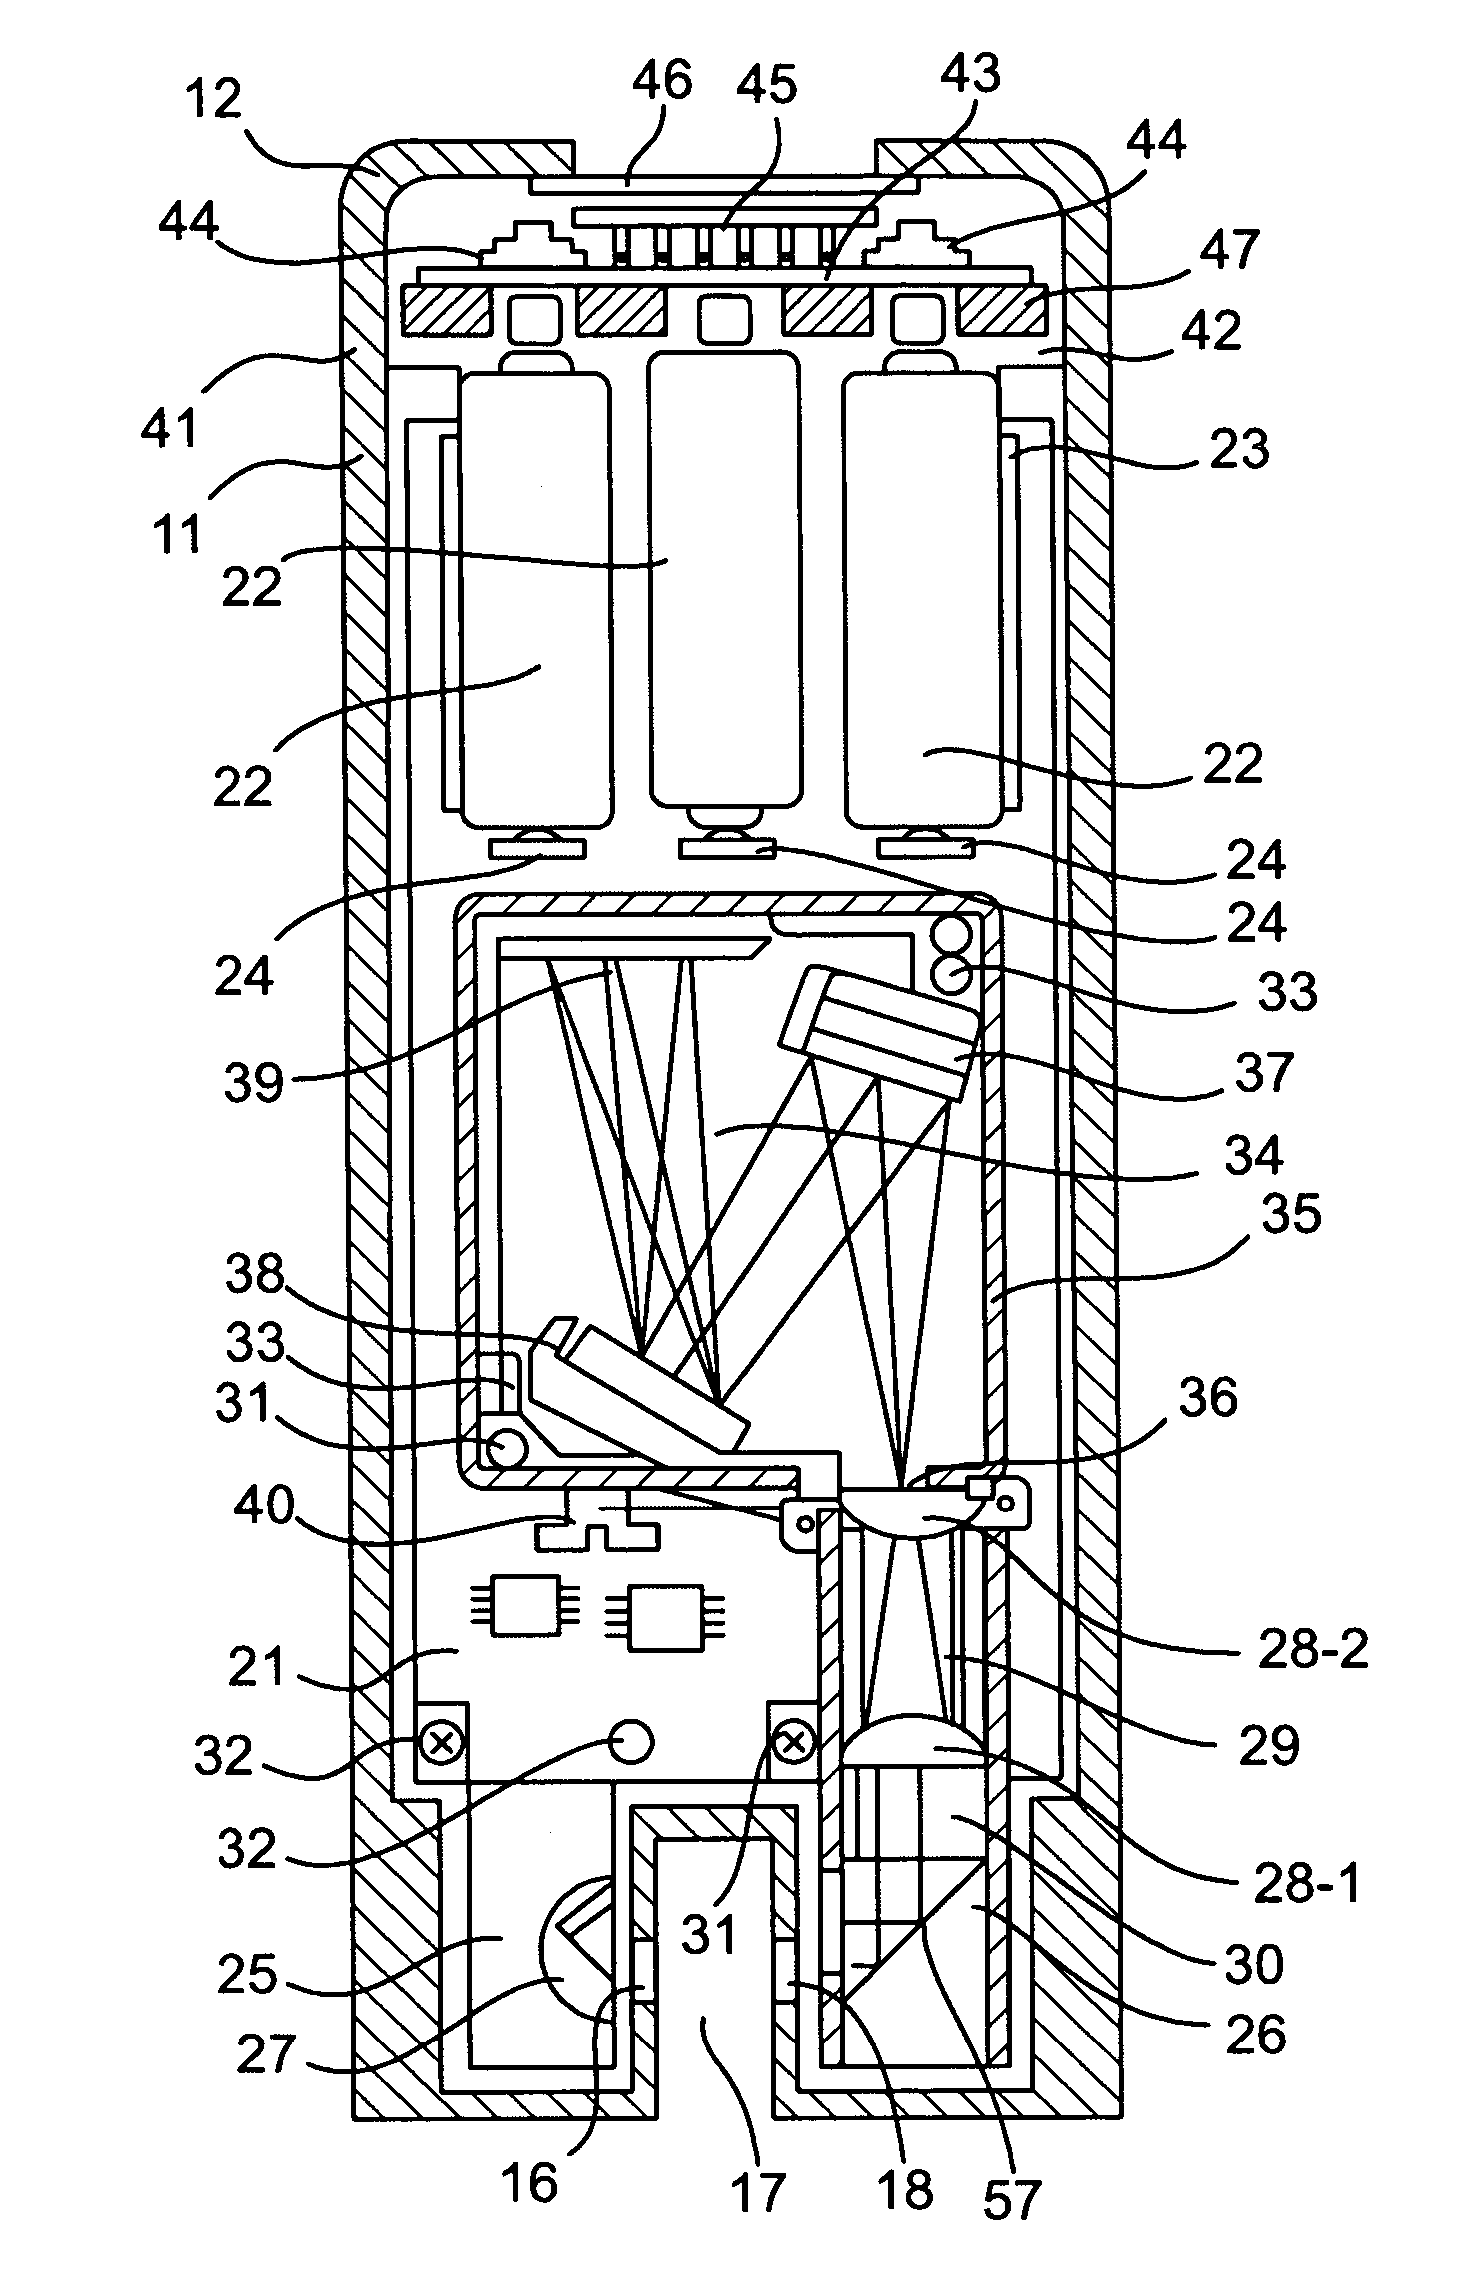 Near UV absorption spectrometer and method for using the same